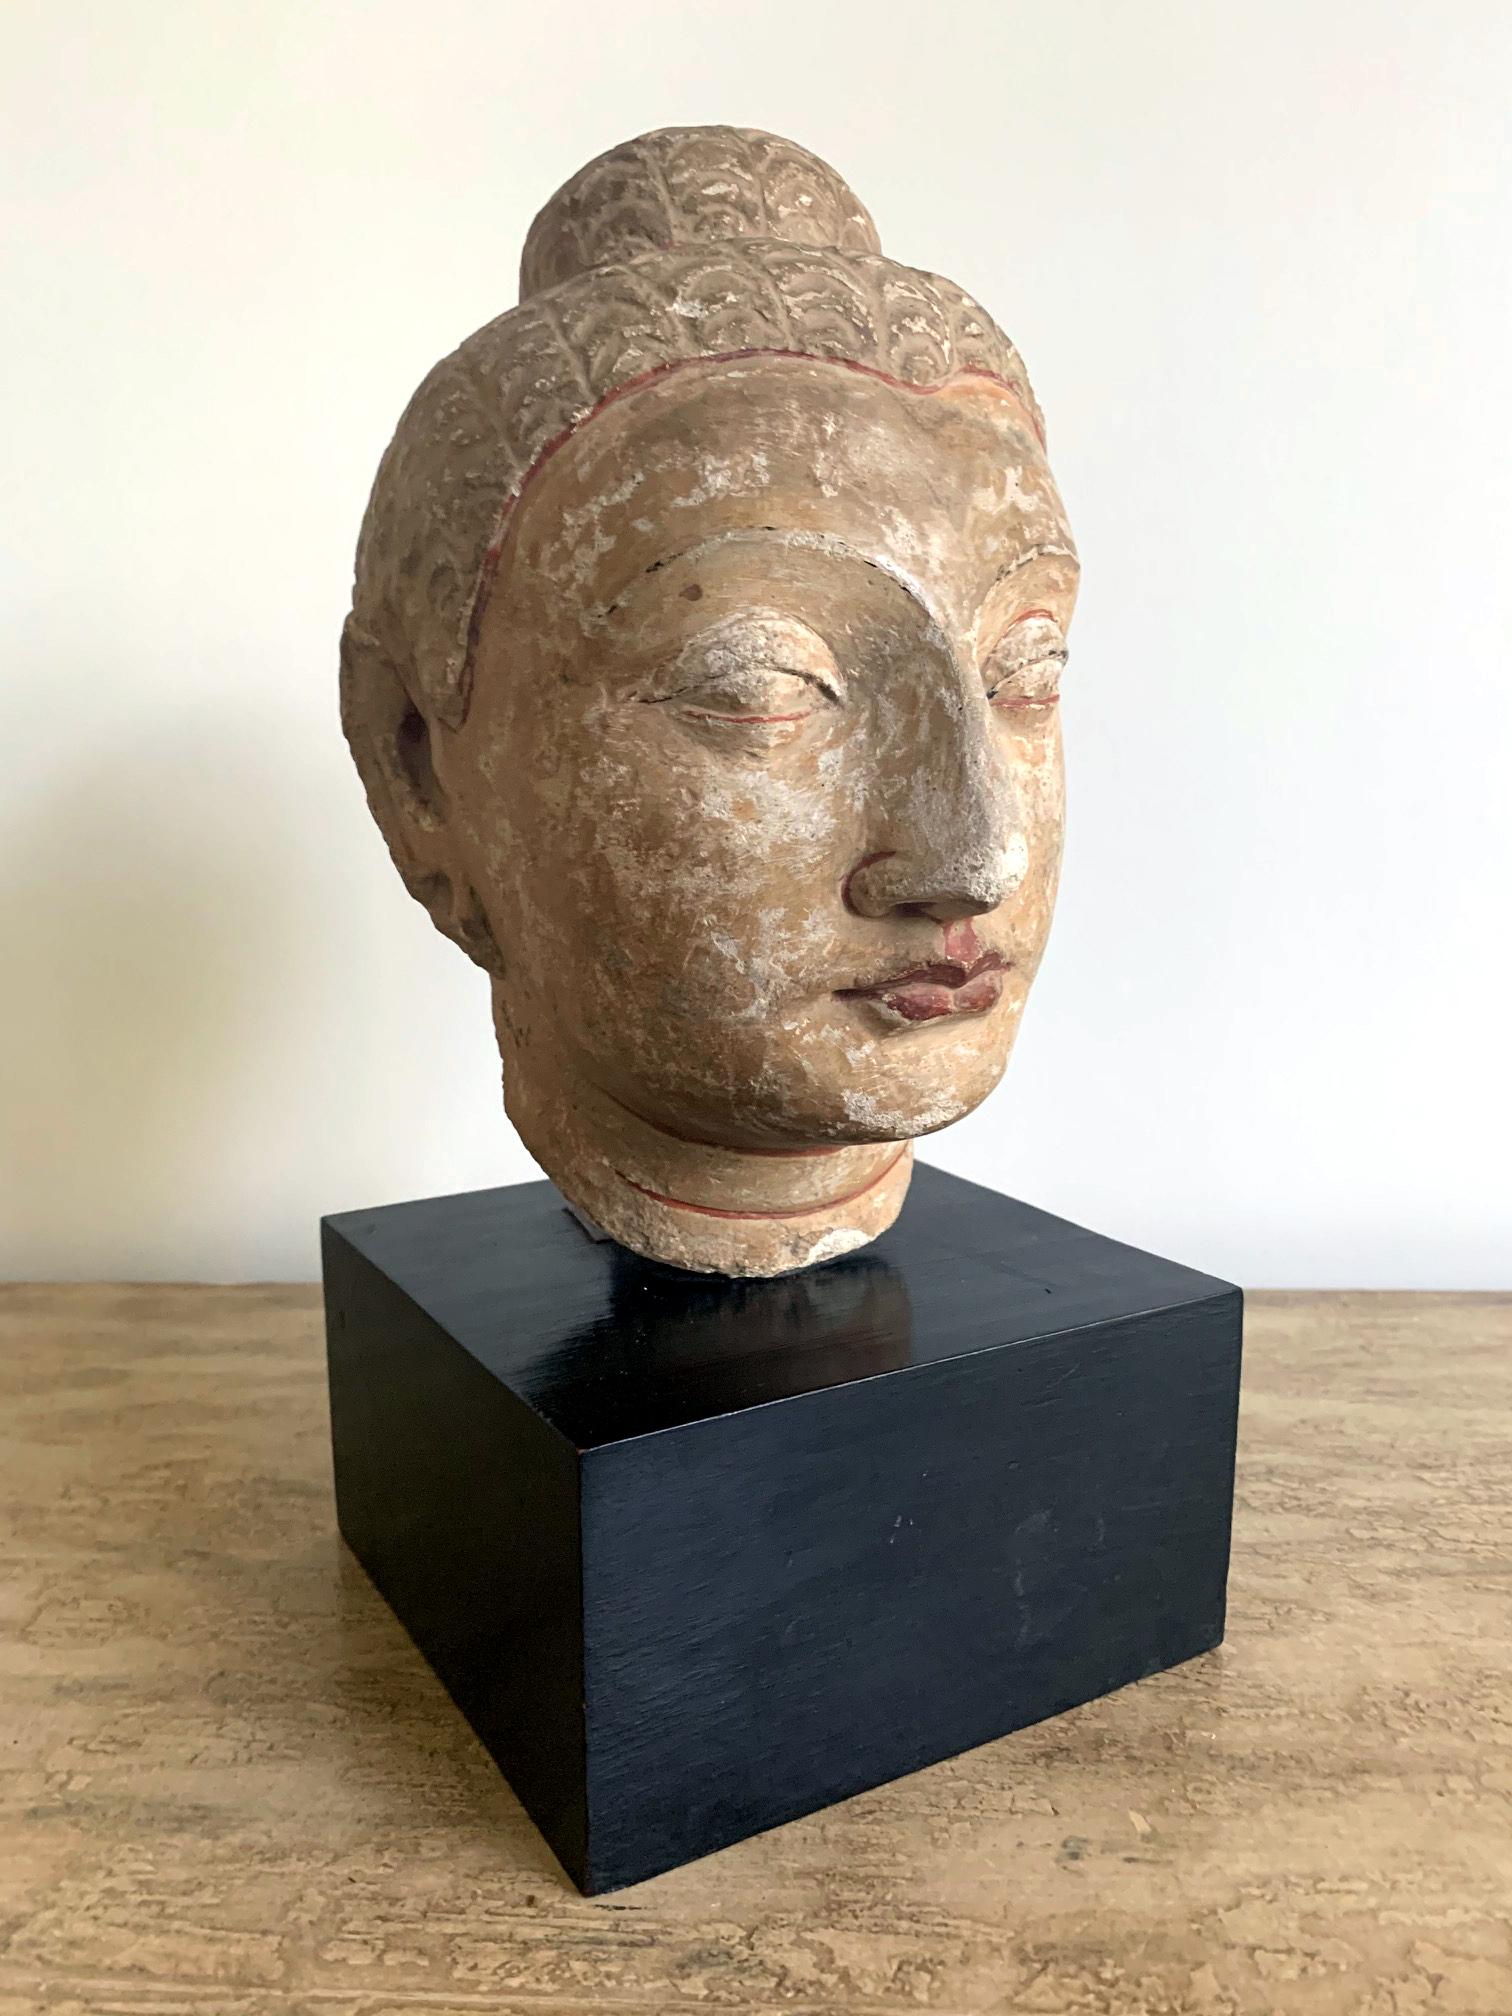 A carved and polychromed stucco on stone or possibly fired clay Buddha head of Gandahara style, a fragment from a larger statue mounted on a display stand, circa 2th-4th century. Gandhara is the name given to an ancient region or province invaded by